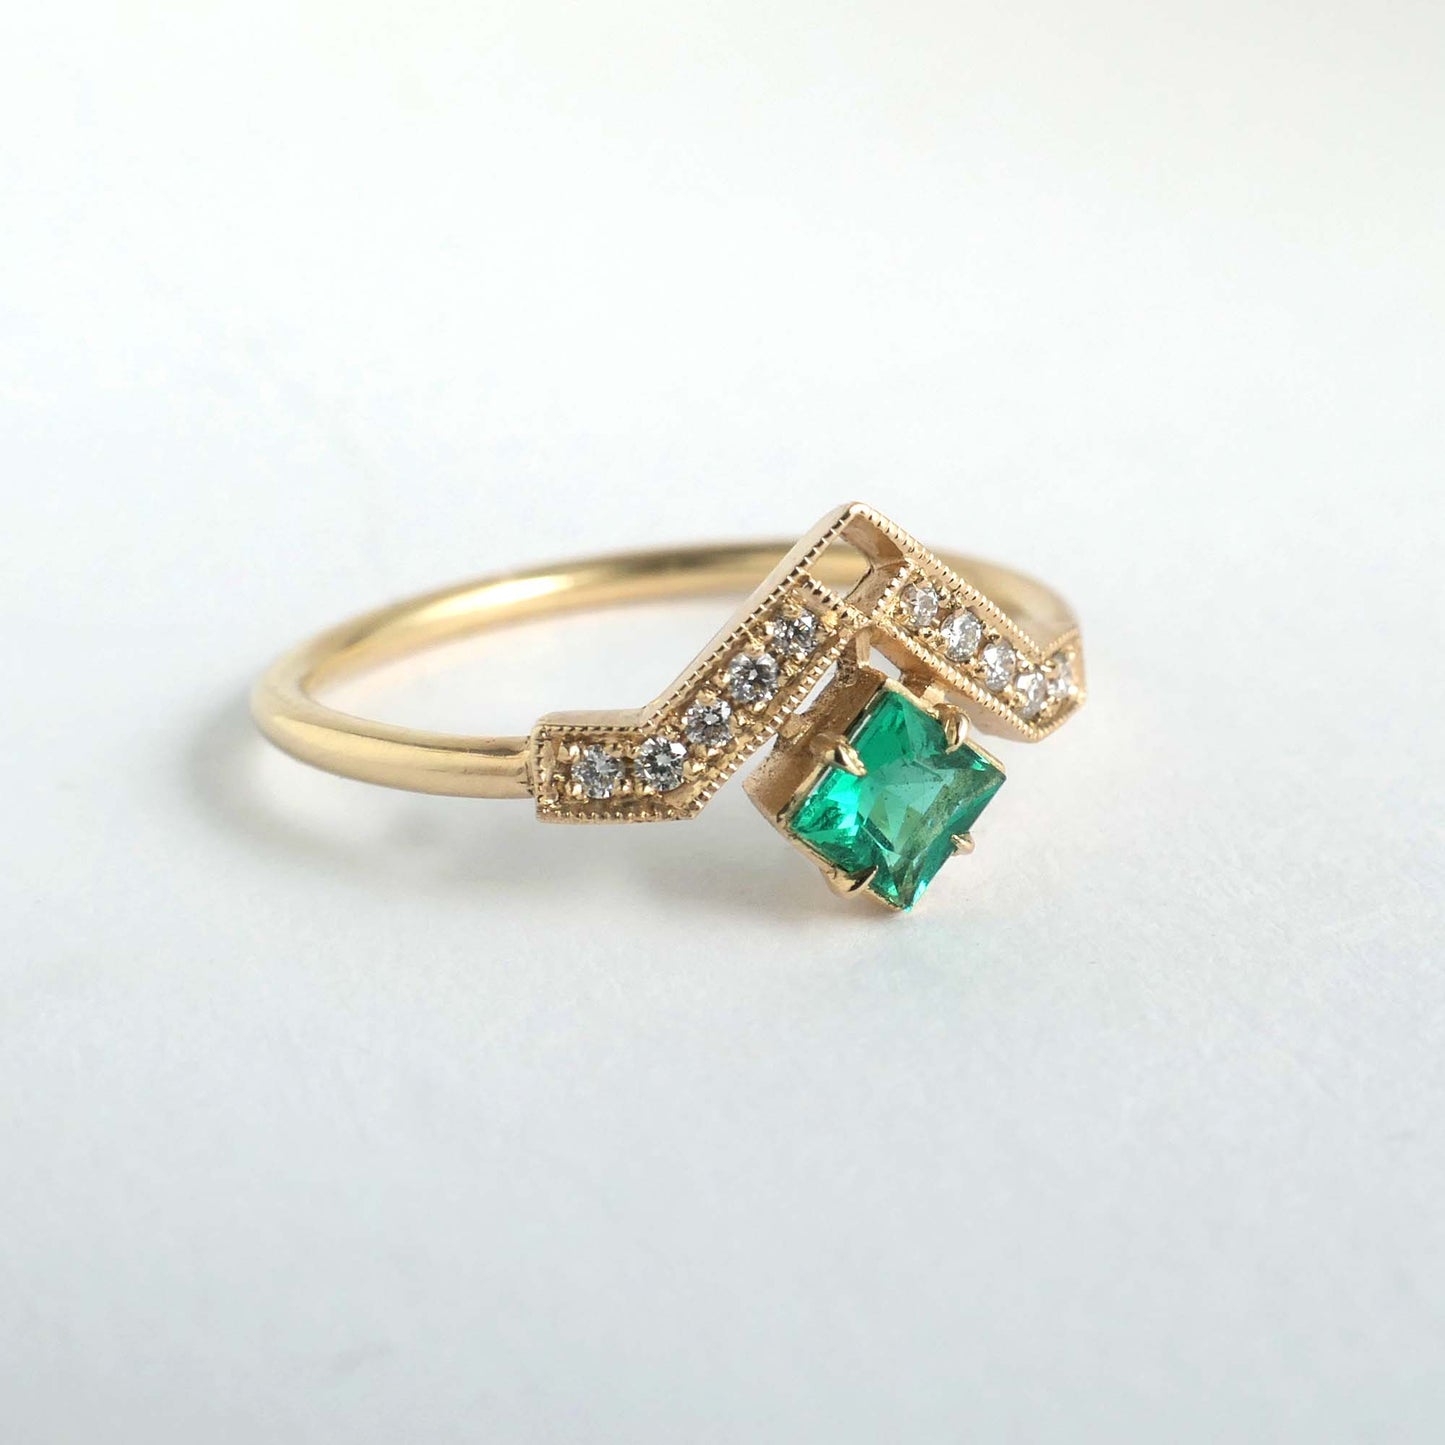 Artio Ring with Emerald